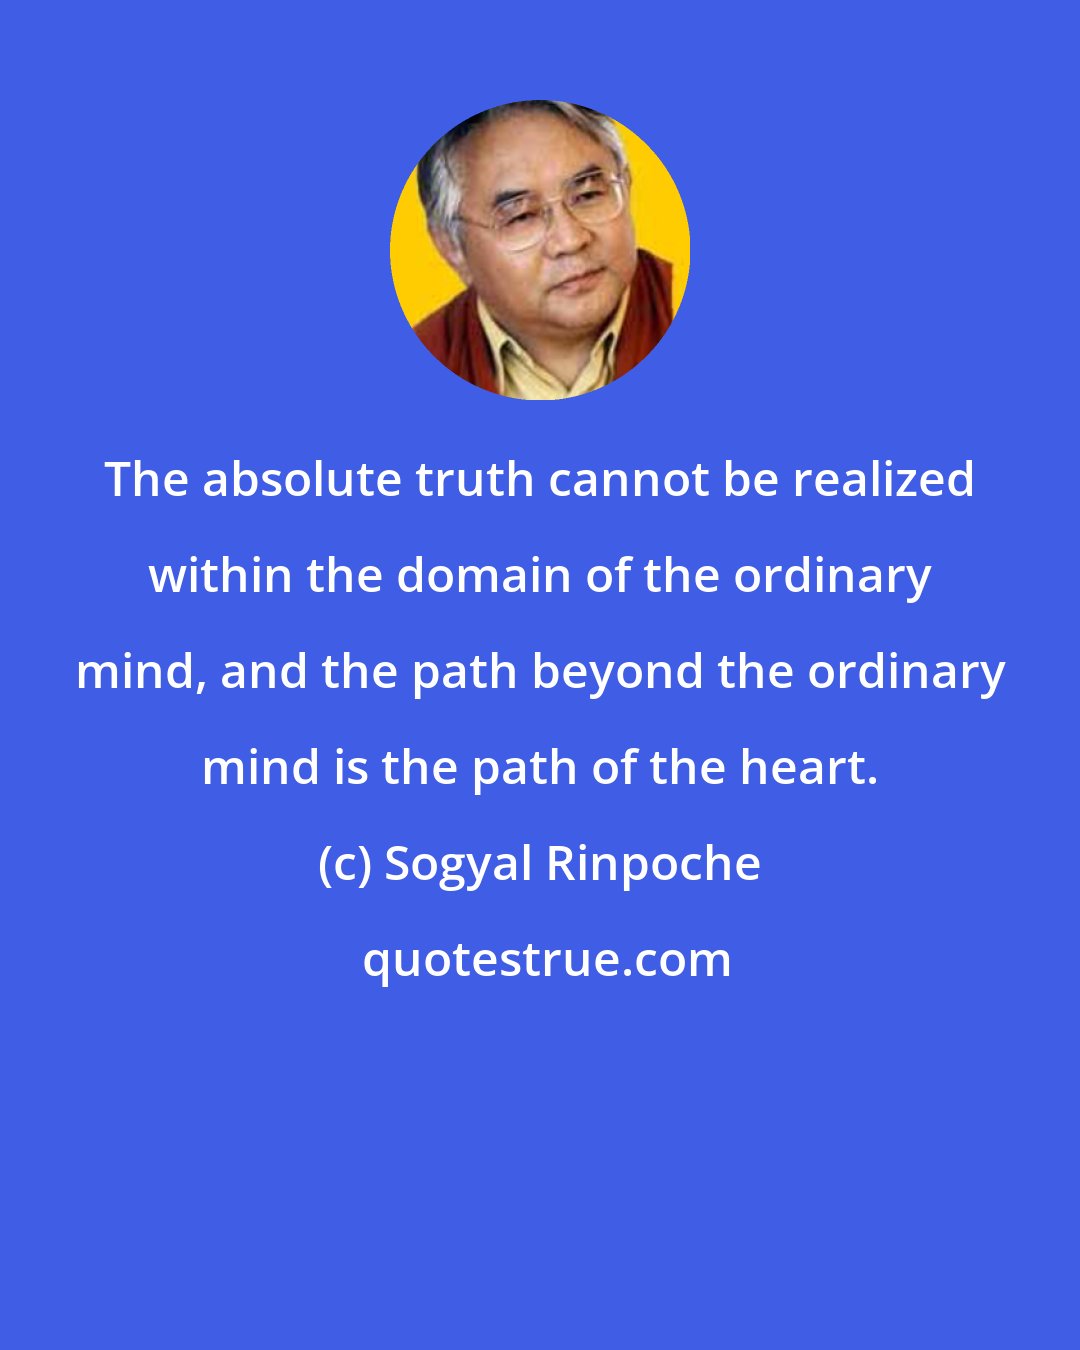 Sogyal Rinpoche: The absolute truth cannot be realized within the domain of the ordinary mind, and the path beyond the ordinary mind is the path of the heart.